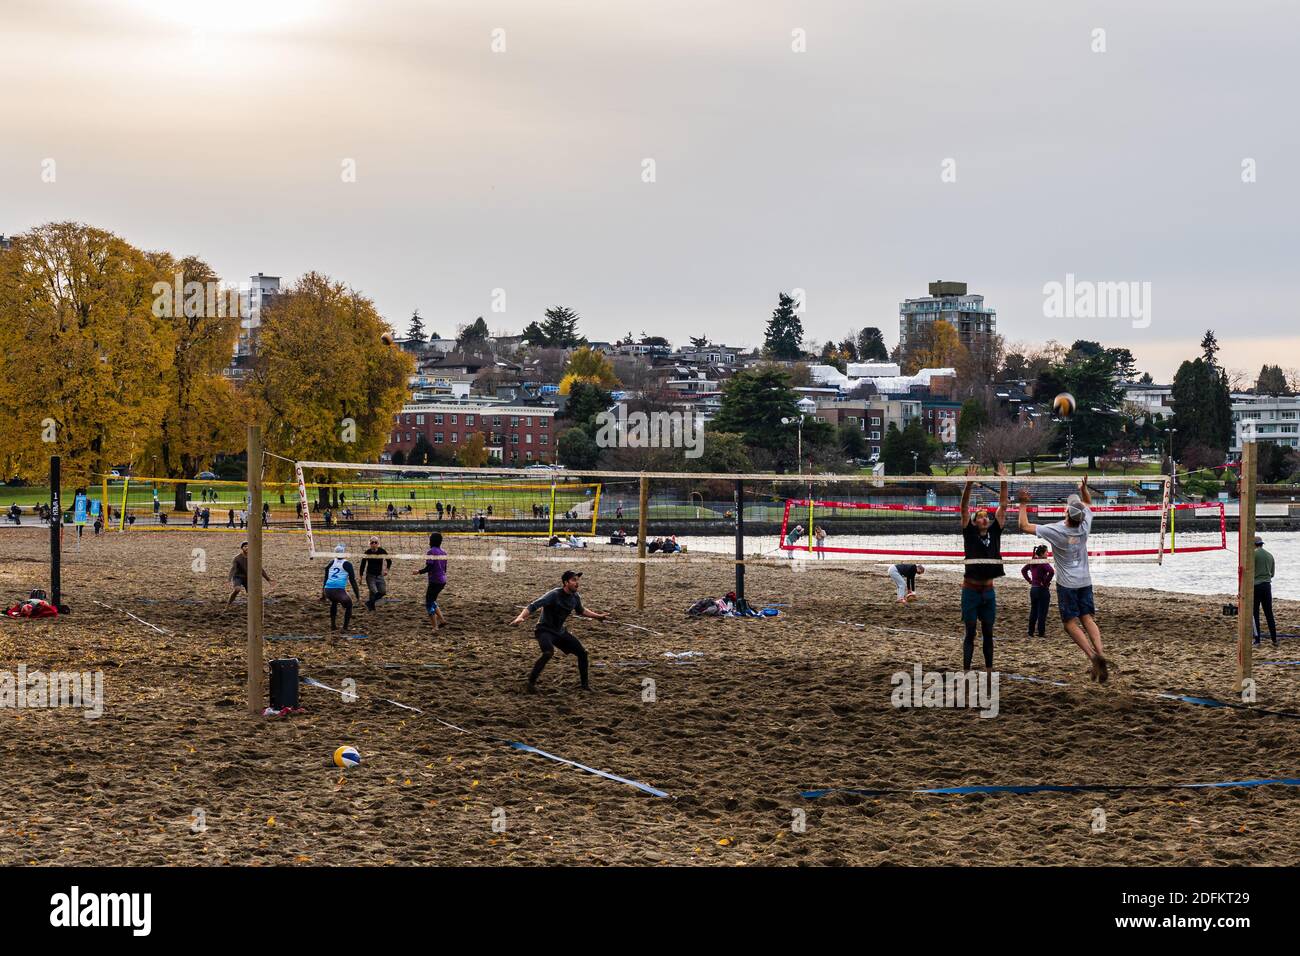 VANCOUVER, CANADA - NOVEMBER 21, 2020: people playing beach volleyball in kitsilano autumn day. Stock Photo